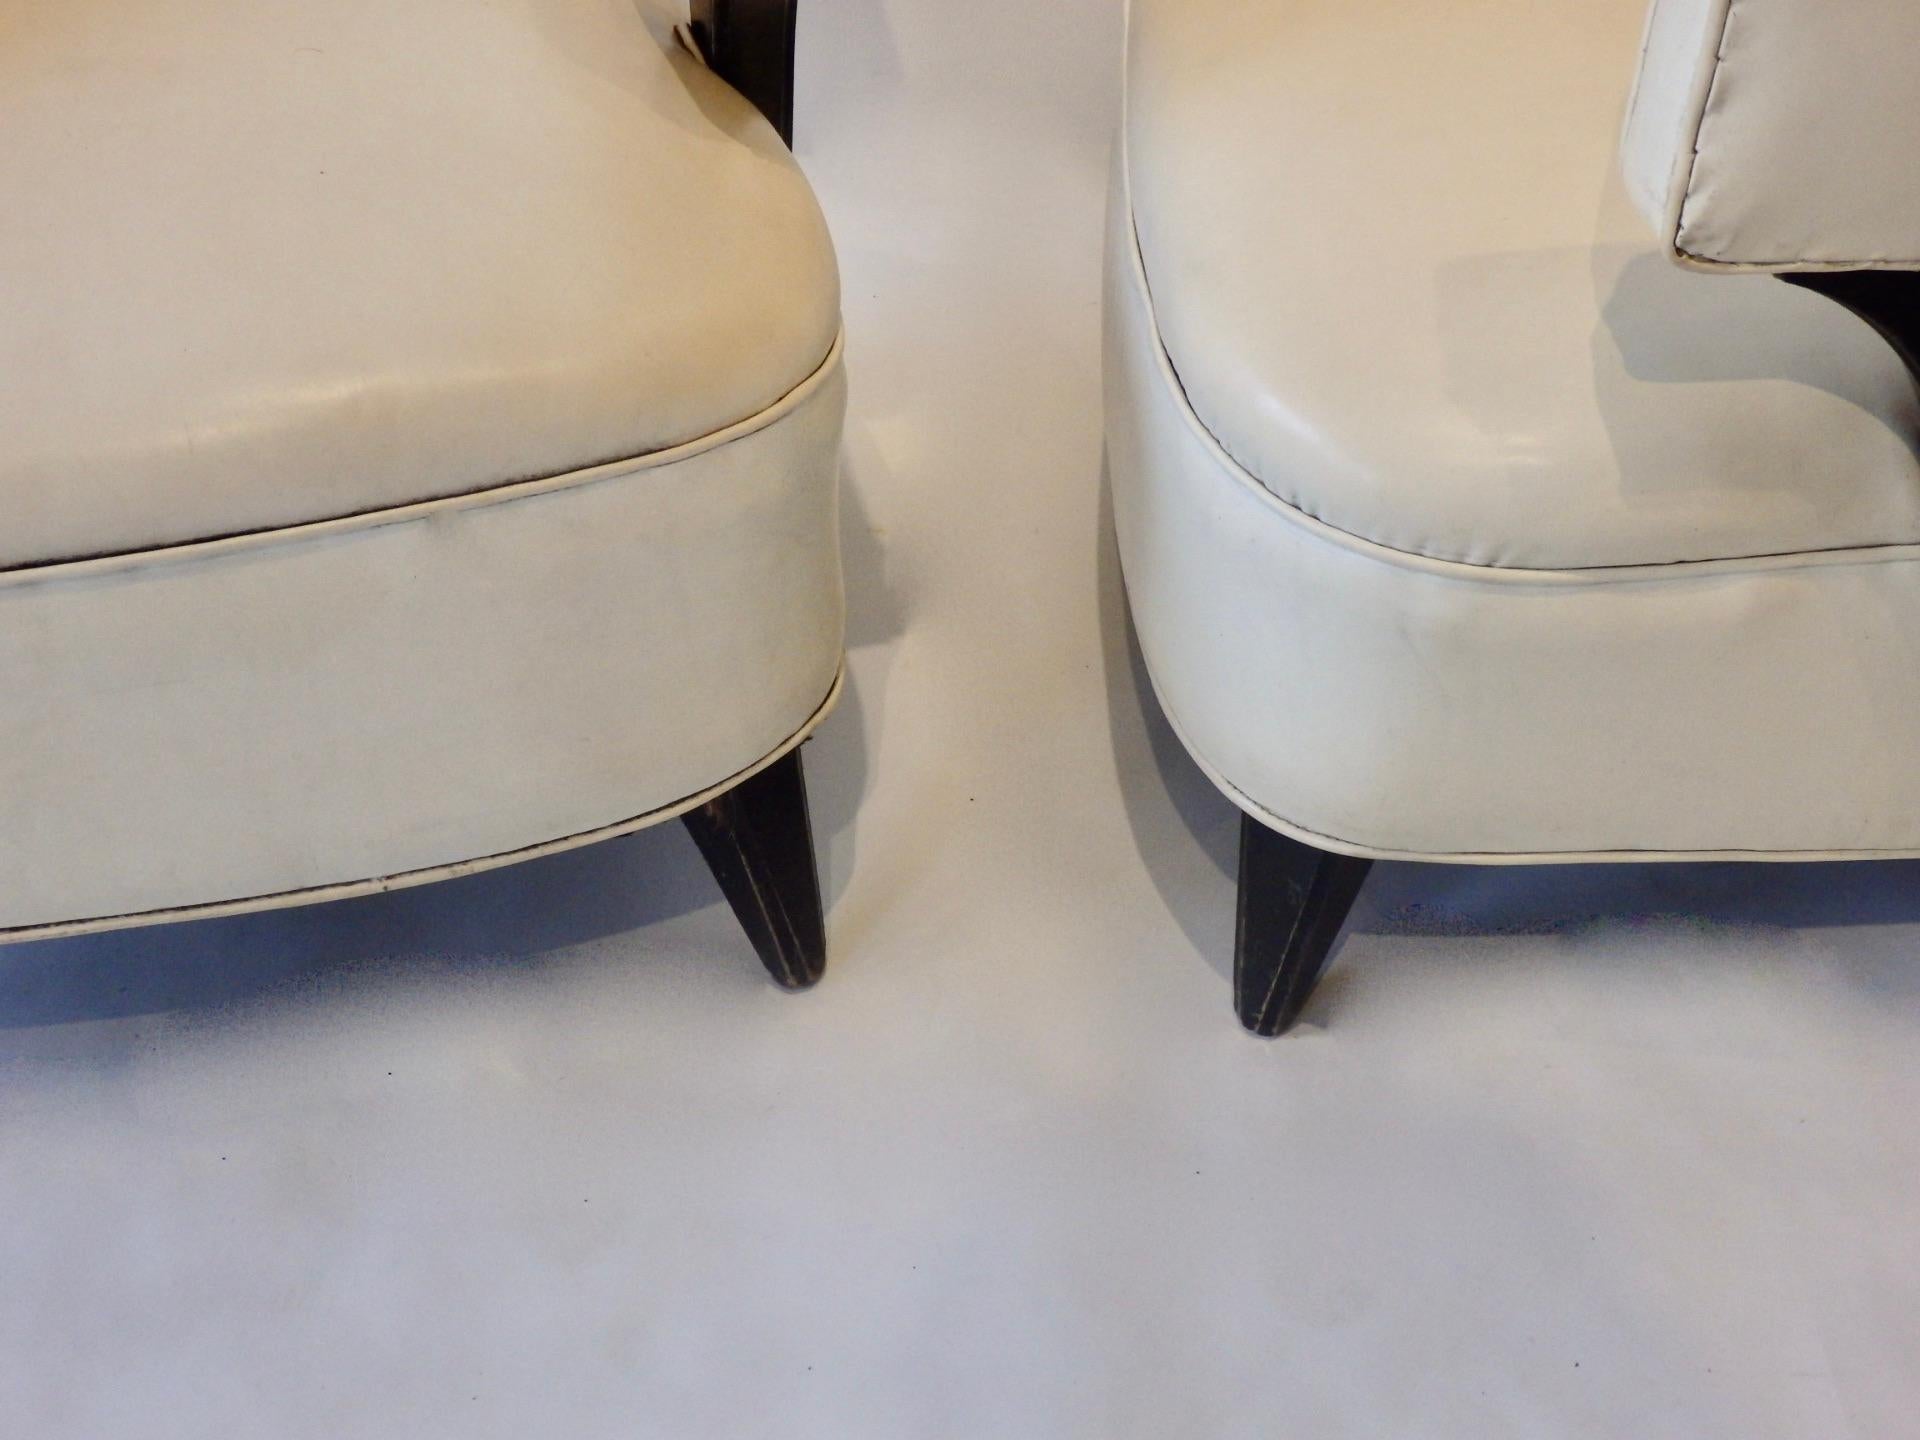 Upholstery Pair of as Found Paul Laszlo Style Art Deco Moderne Club or Lounge Chairs